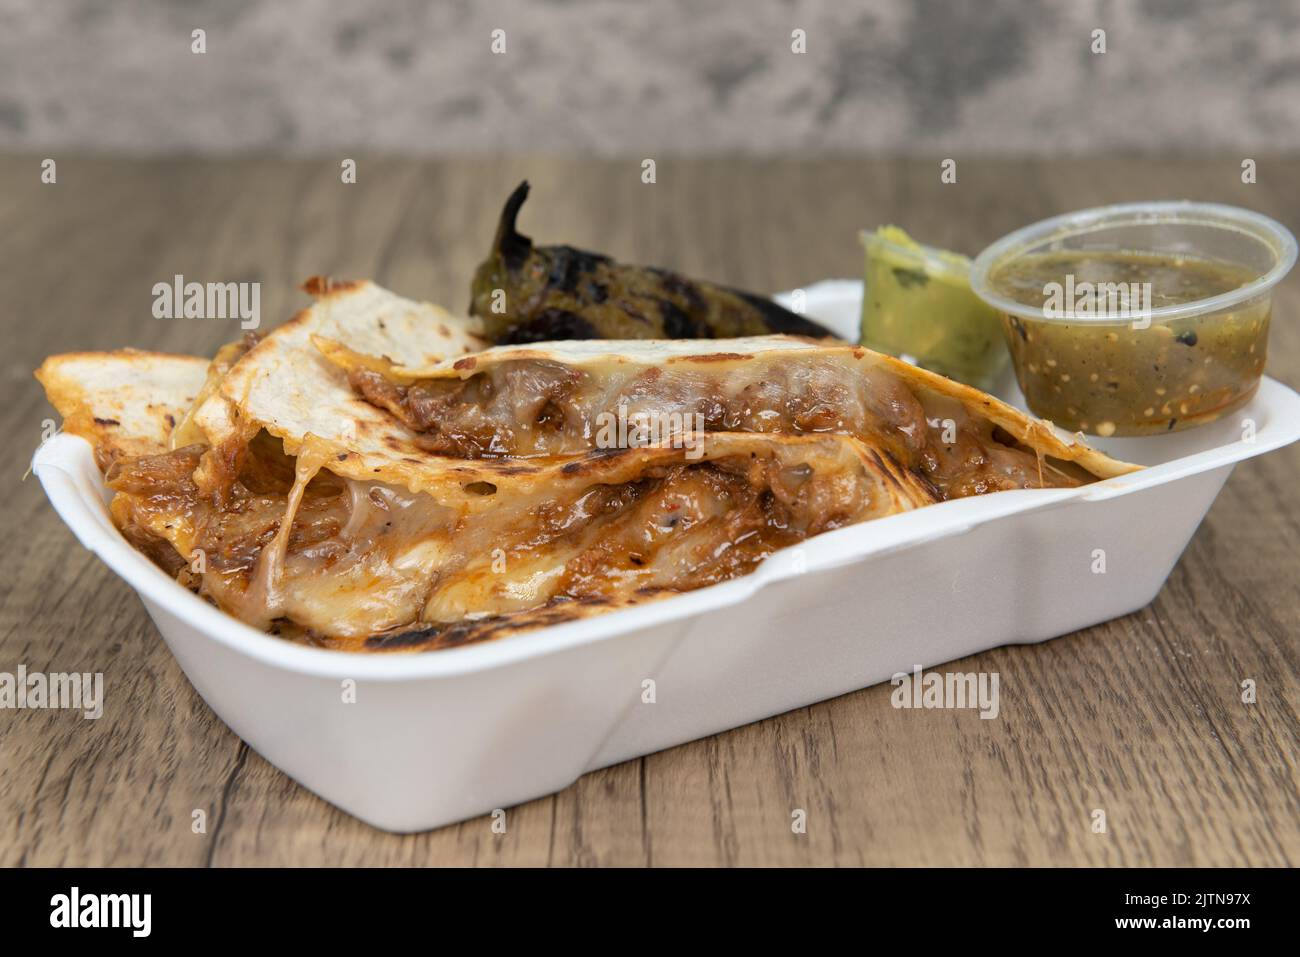 Grilled birria quesadillas are oozing melted cheese out from between the tortillas and served with grilled jalapeno, salsa, and guacamole. Stock Photo